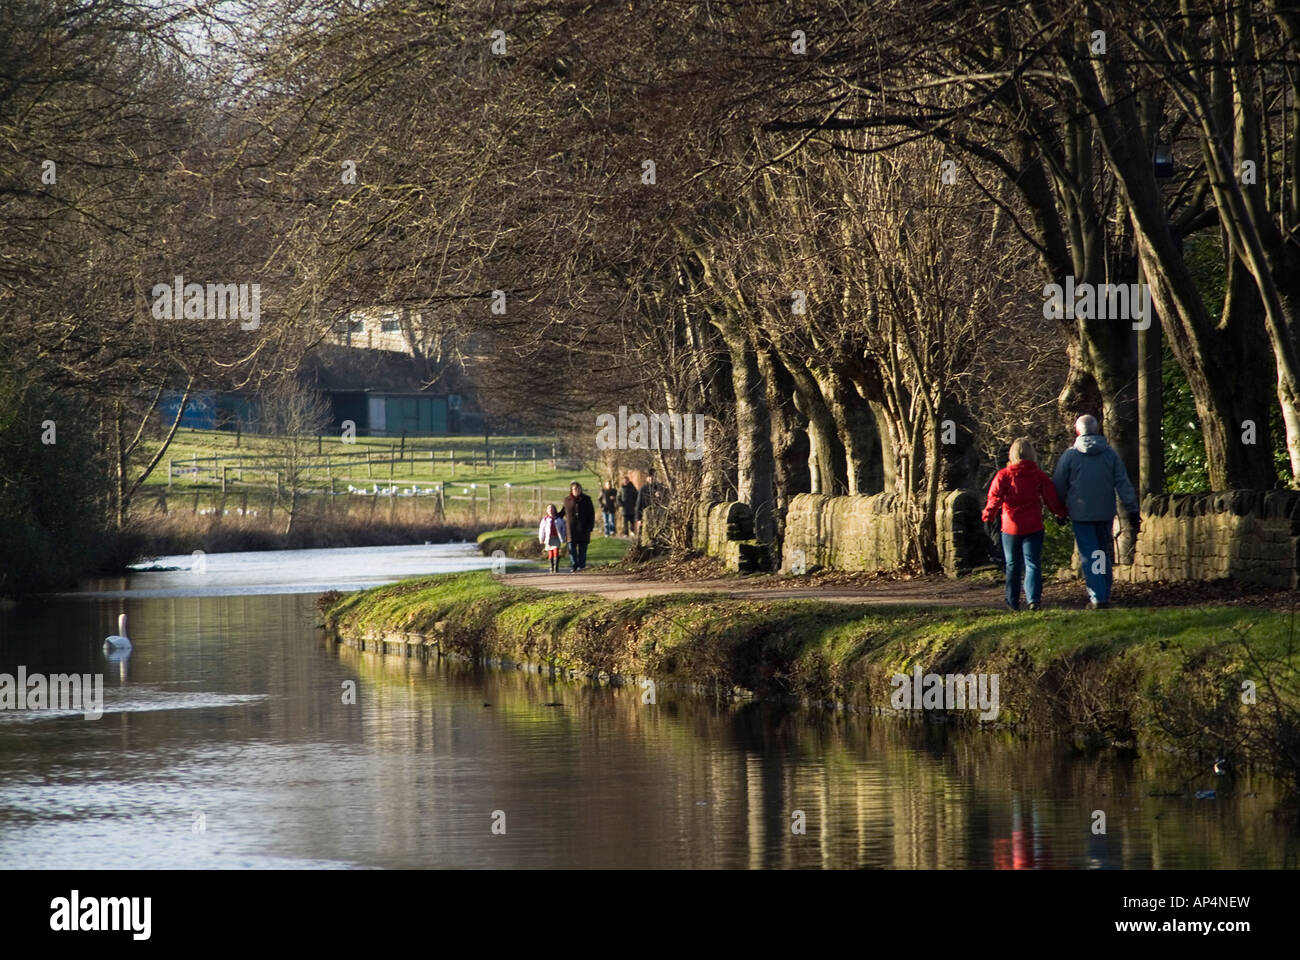 dh River Aire SALTAIRE WEST YORKSHIRE People walking along Leeds and Liverpool canal tow path uk walkers towpath england winter walk couple walks Stock Photo